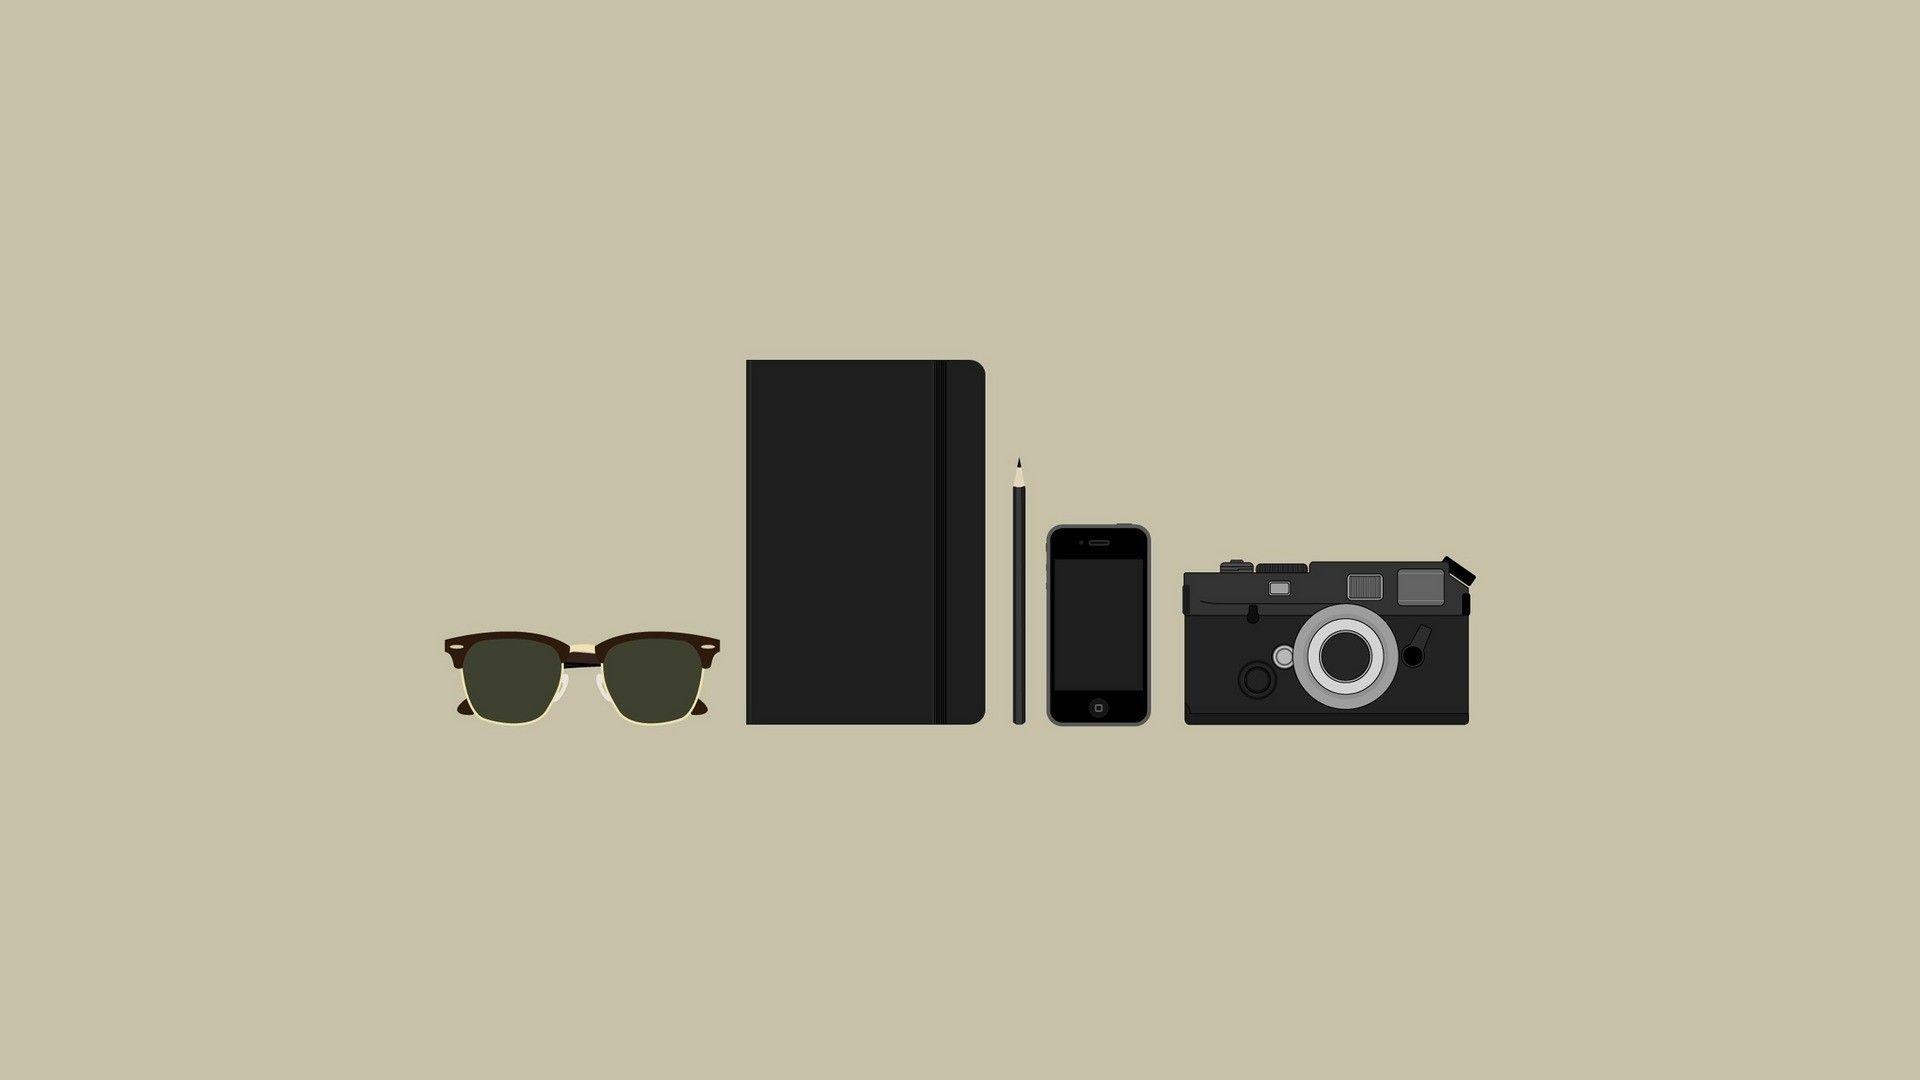 Accessories business man wallpaper and image